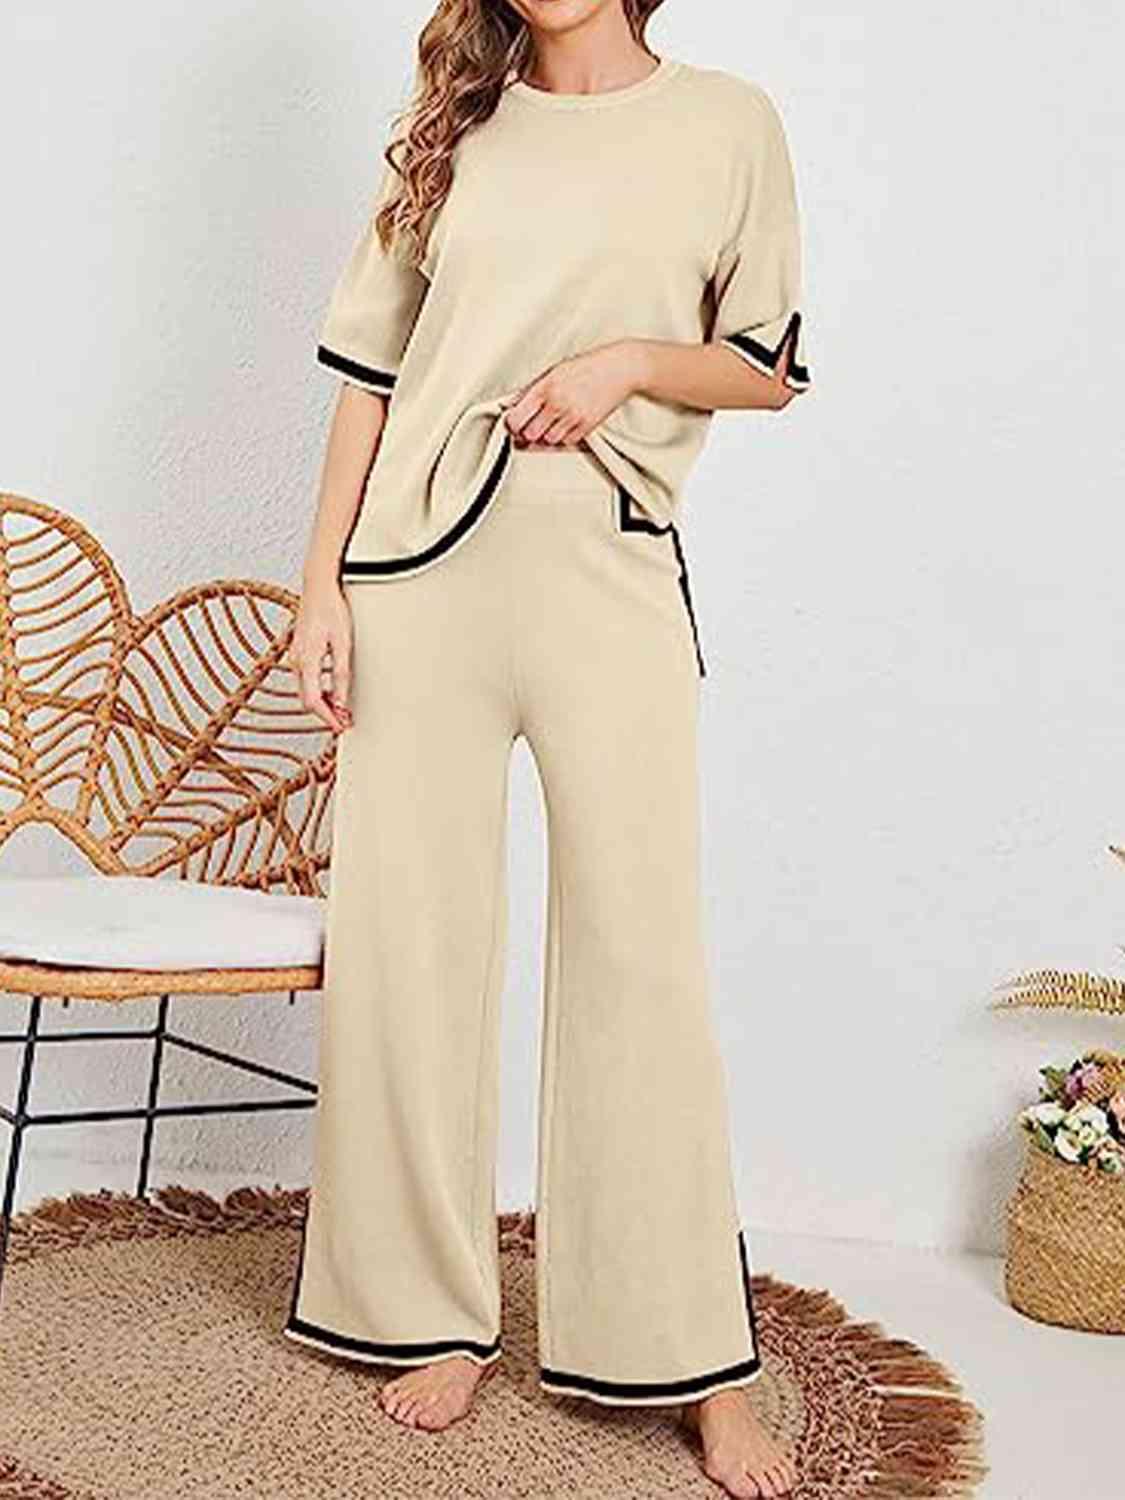 a woman standing in a room wearing a beige top and wide legged pants